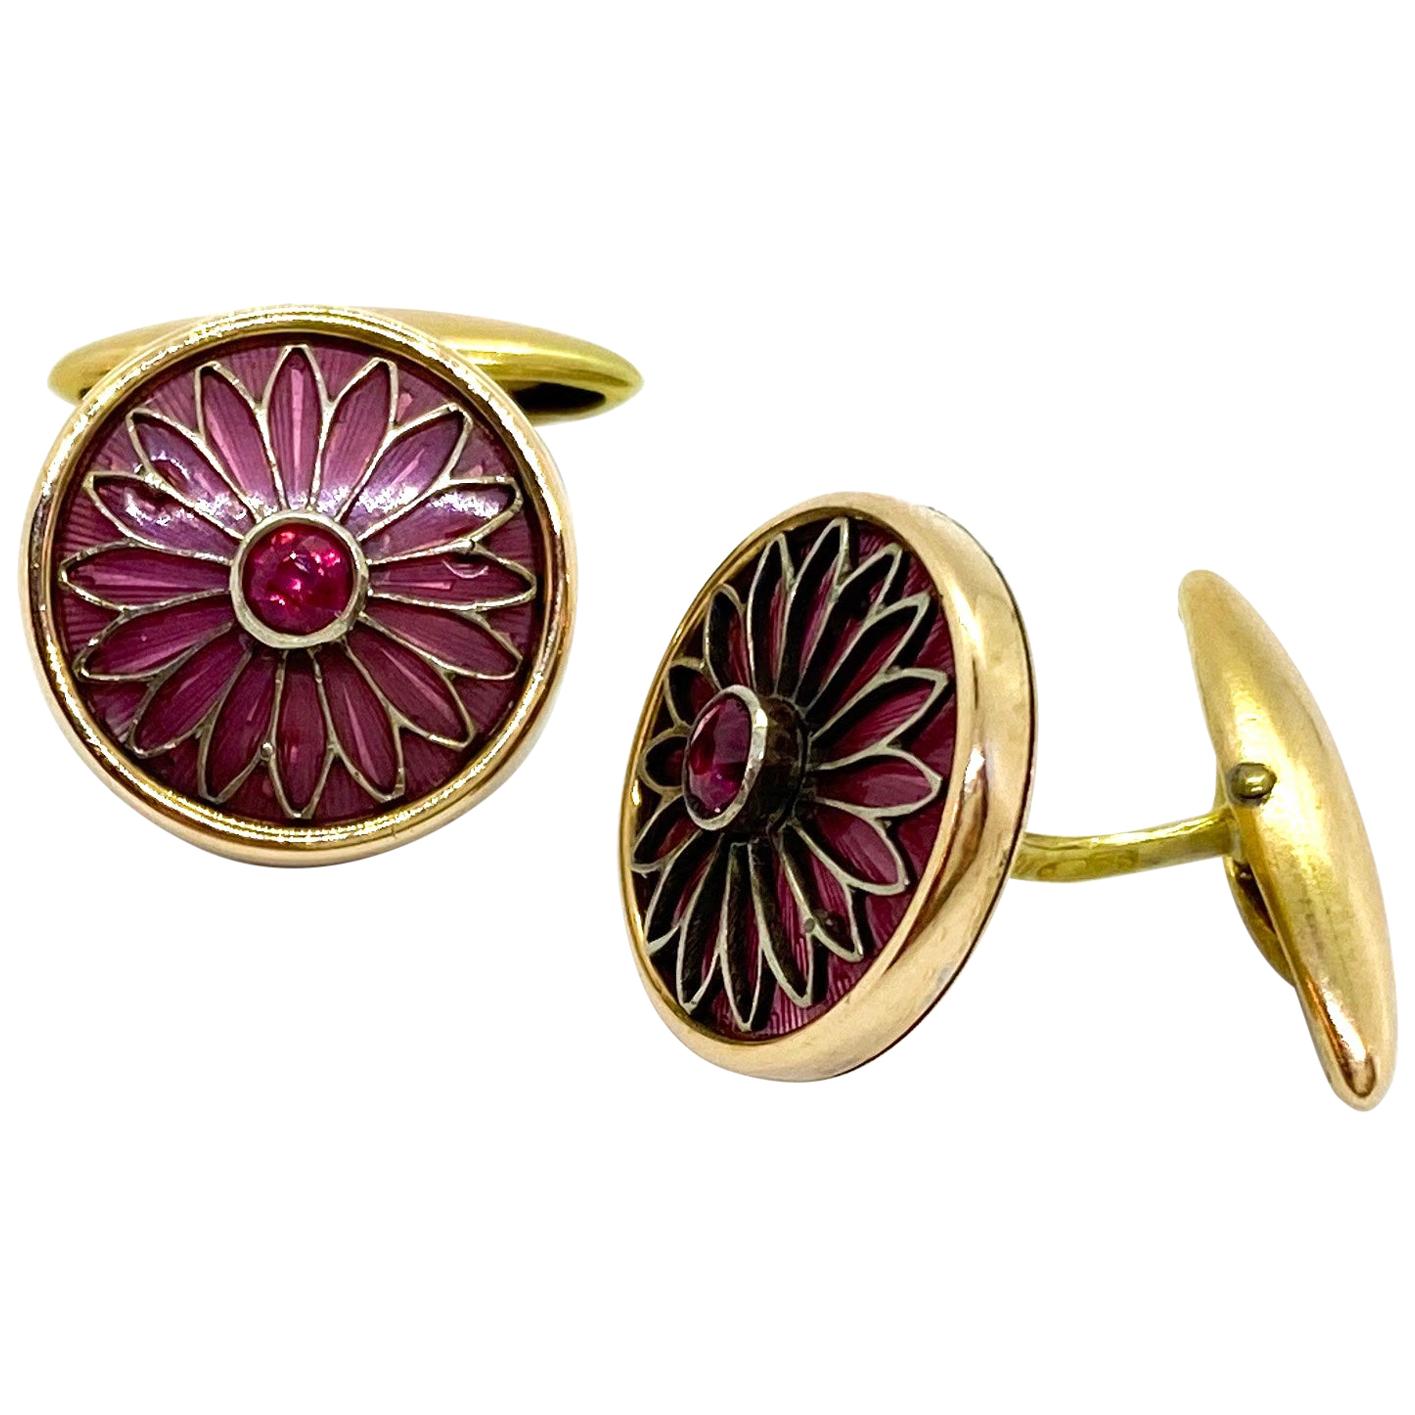 14 Carat Yellow Gold Guilloche Enamel NV Russia Red Stone Cufflinks
14k, Russian Gold Stamp 56, NV
Around 1819, probably Moscow
Diameter 1.8cm
A small dent on the back of the jewelry.